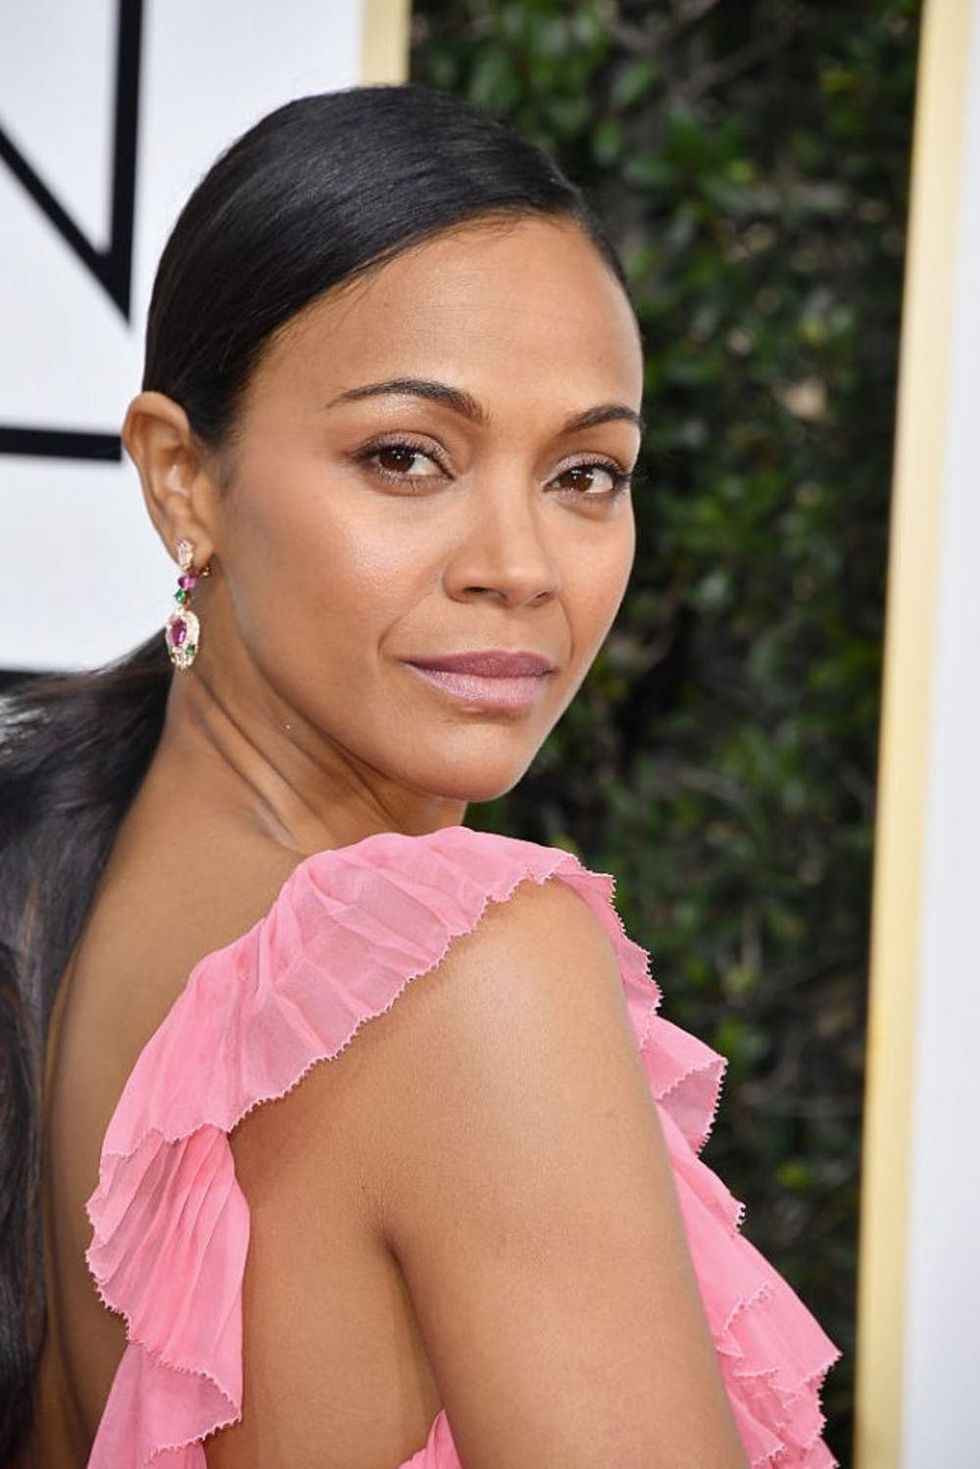 BEVERLY HILLS, CA - JANUARY 08: Actress Zoe Saldana attends the 74th Annual Golden Globe Awards at The Beverly Hilton Hotel on January 8, 2017 in Beverly Hills, California. (Photo by Steve Granitz/WireImage)